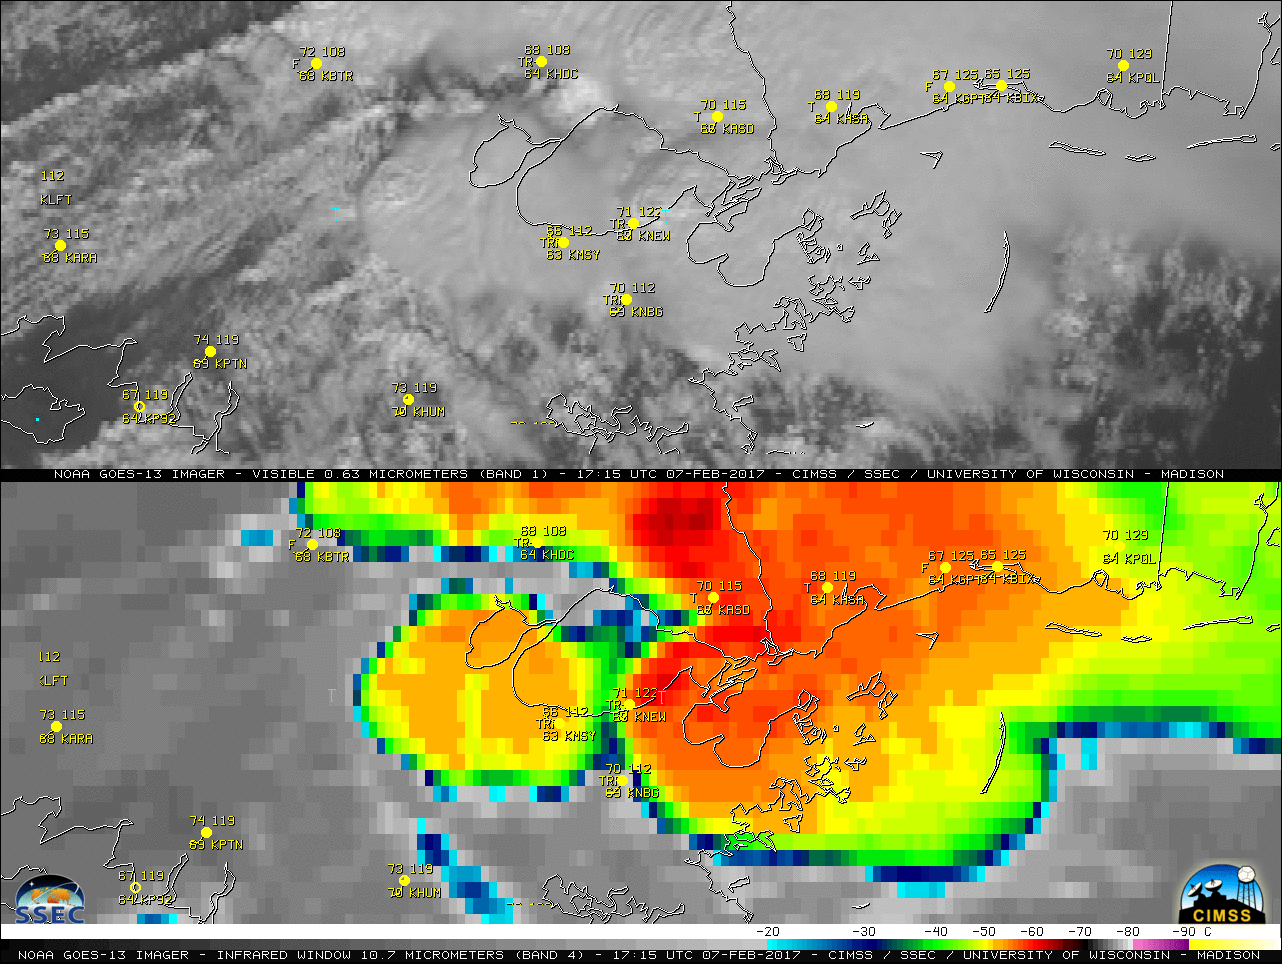 GOES-13 0.63 µm Visible (top) and 10.7 µm Infrared Window images (bottom), with hourly surface reports and locations of the tornado reports.